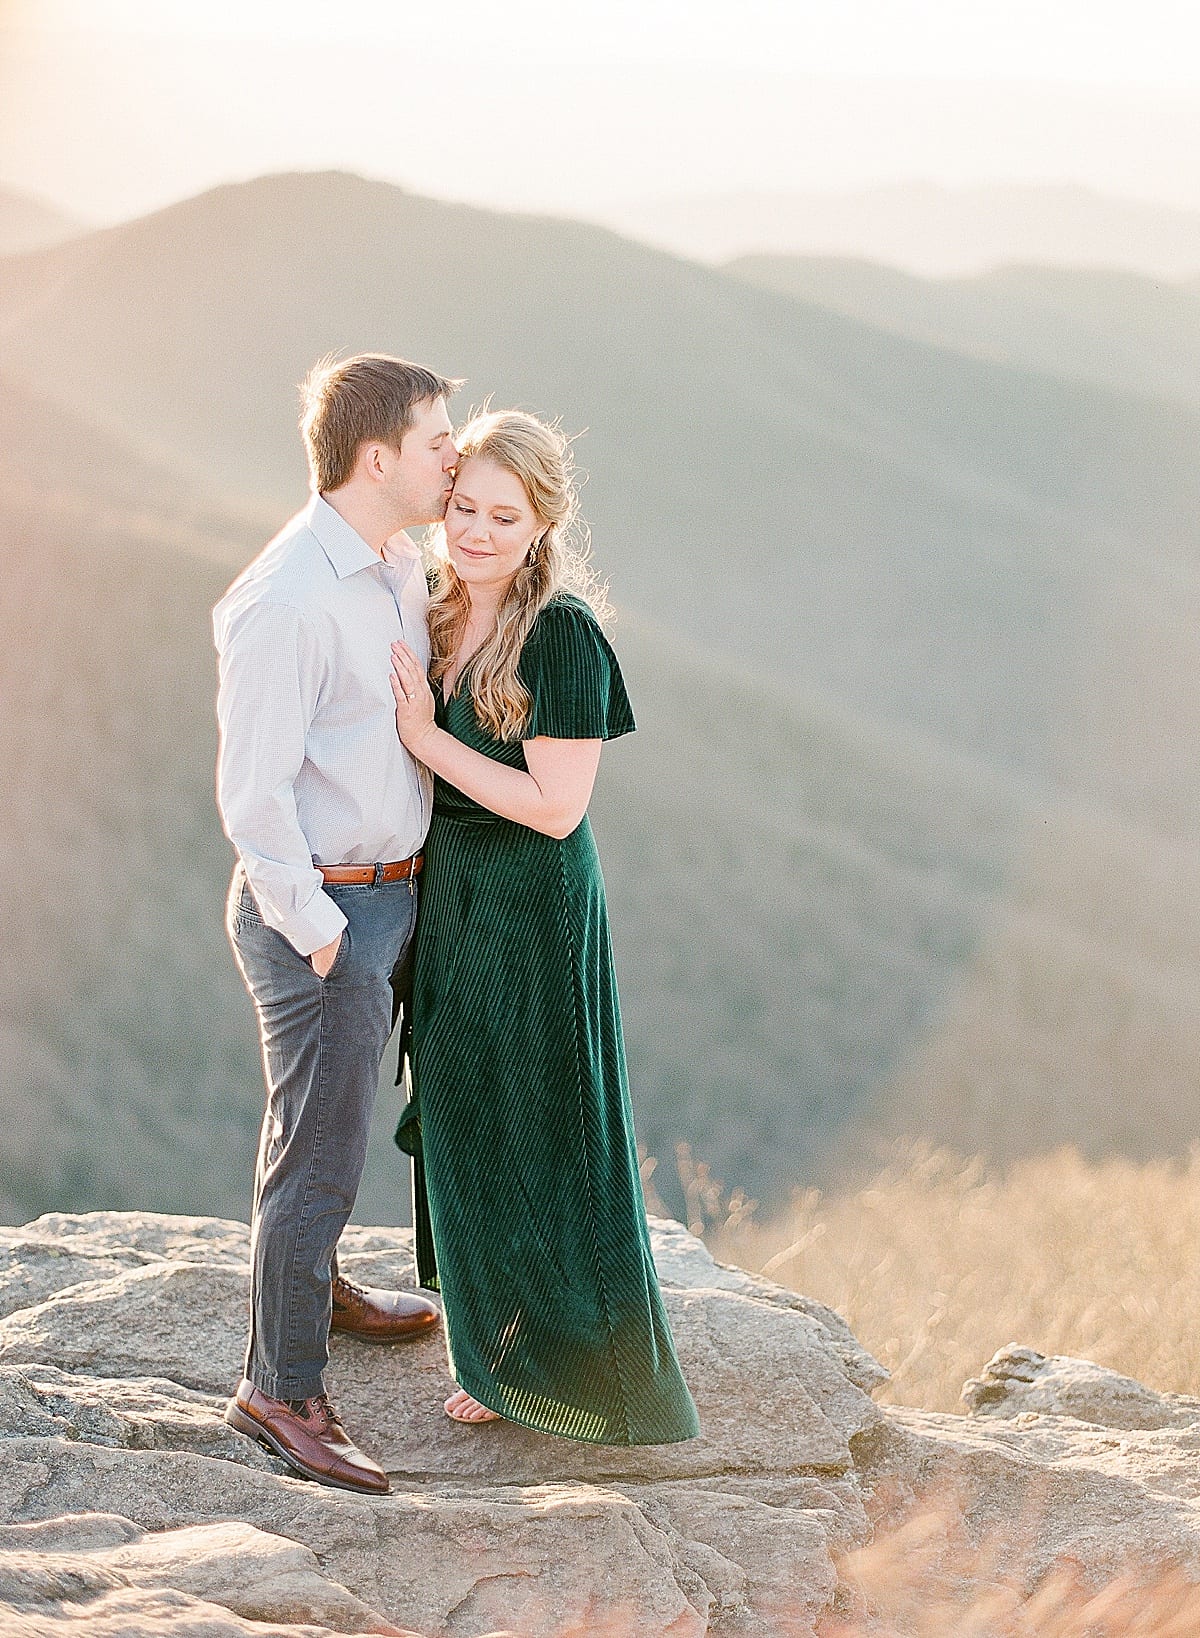 Mountaintop Engagement Session Couple Snuggling Together Photo